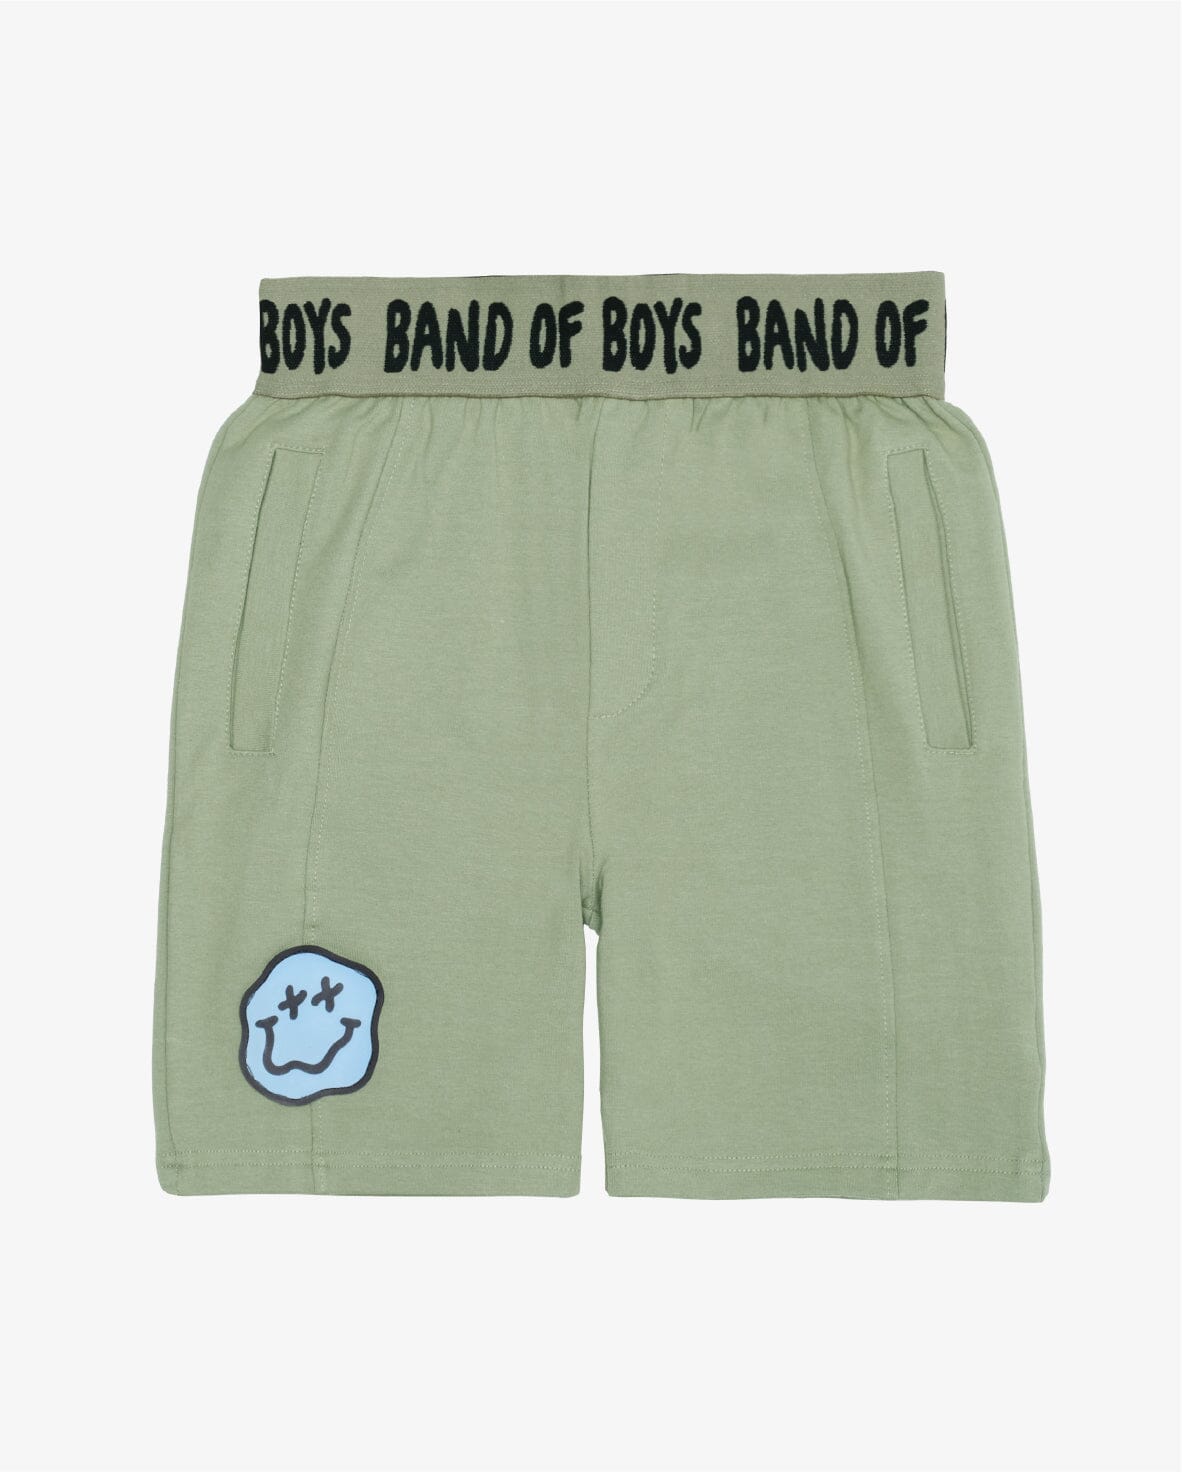 BAND OF BOYS | Spaced Out Shorts - Pistachio Boys Band of Boys